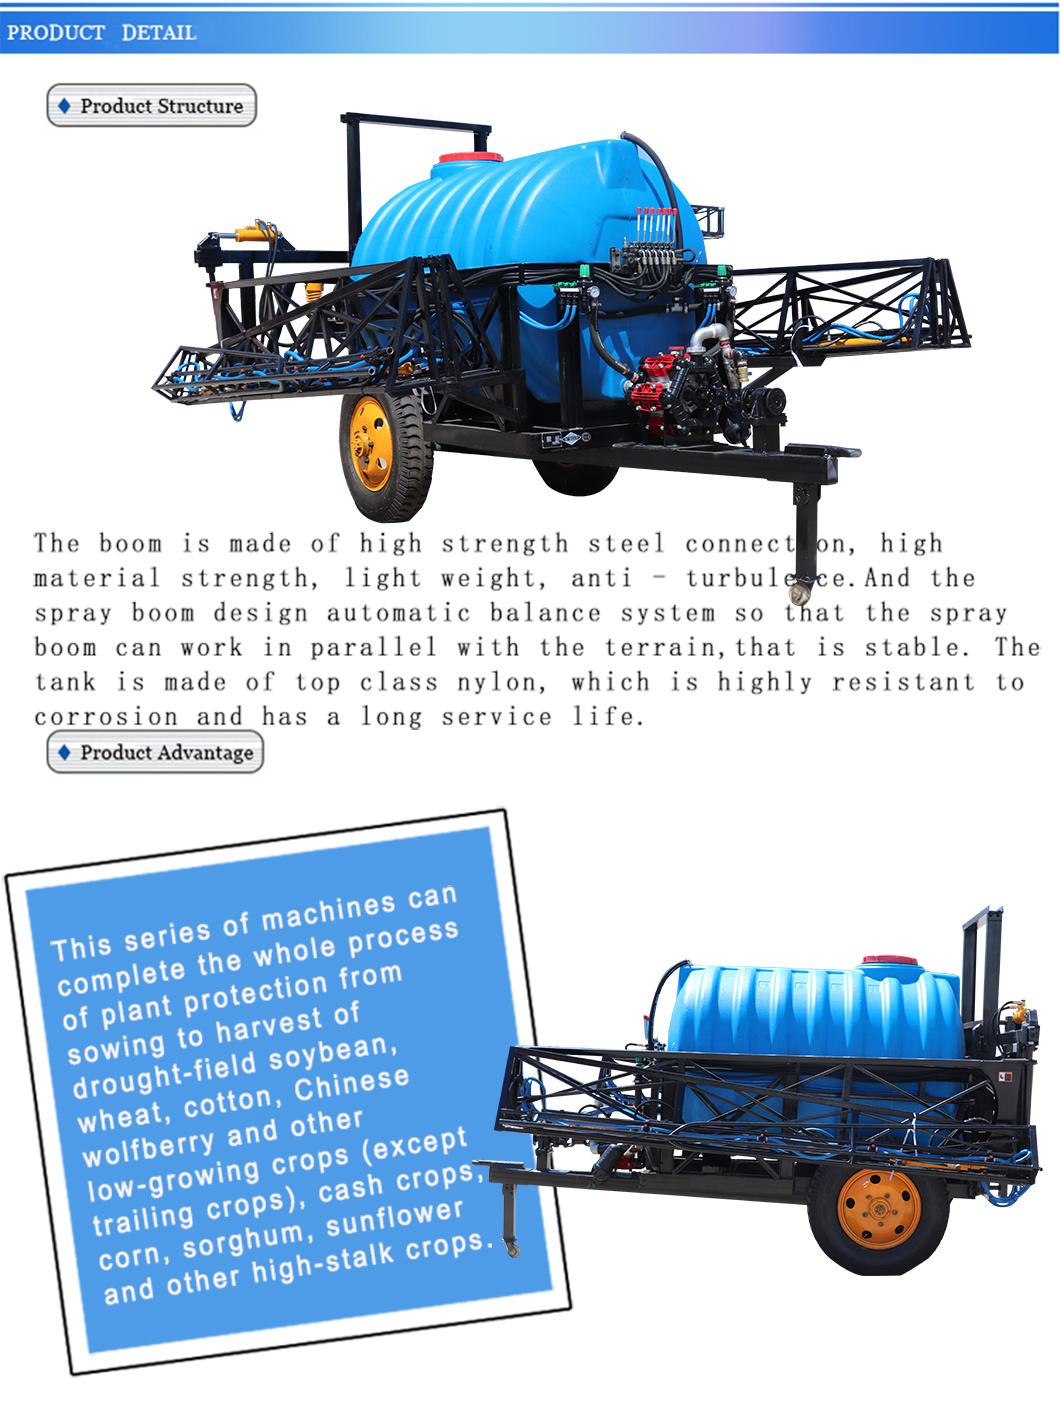 High Performance Farm Tractor Drawn Boom Mounted Motorized Mist Blower Agricultural Sprayer